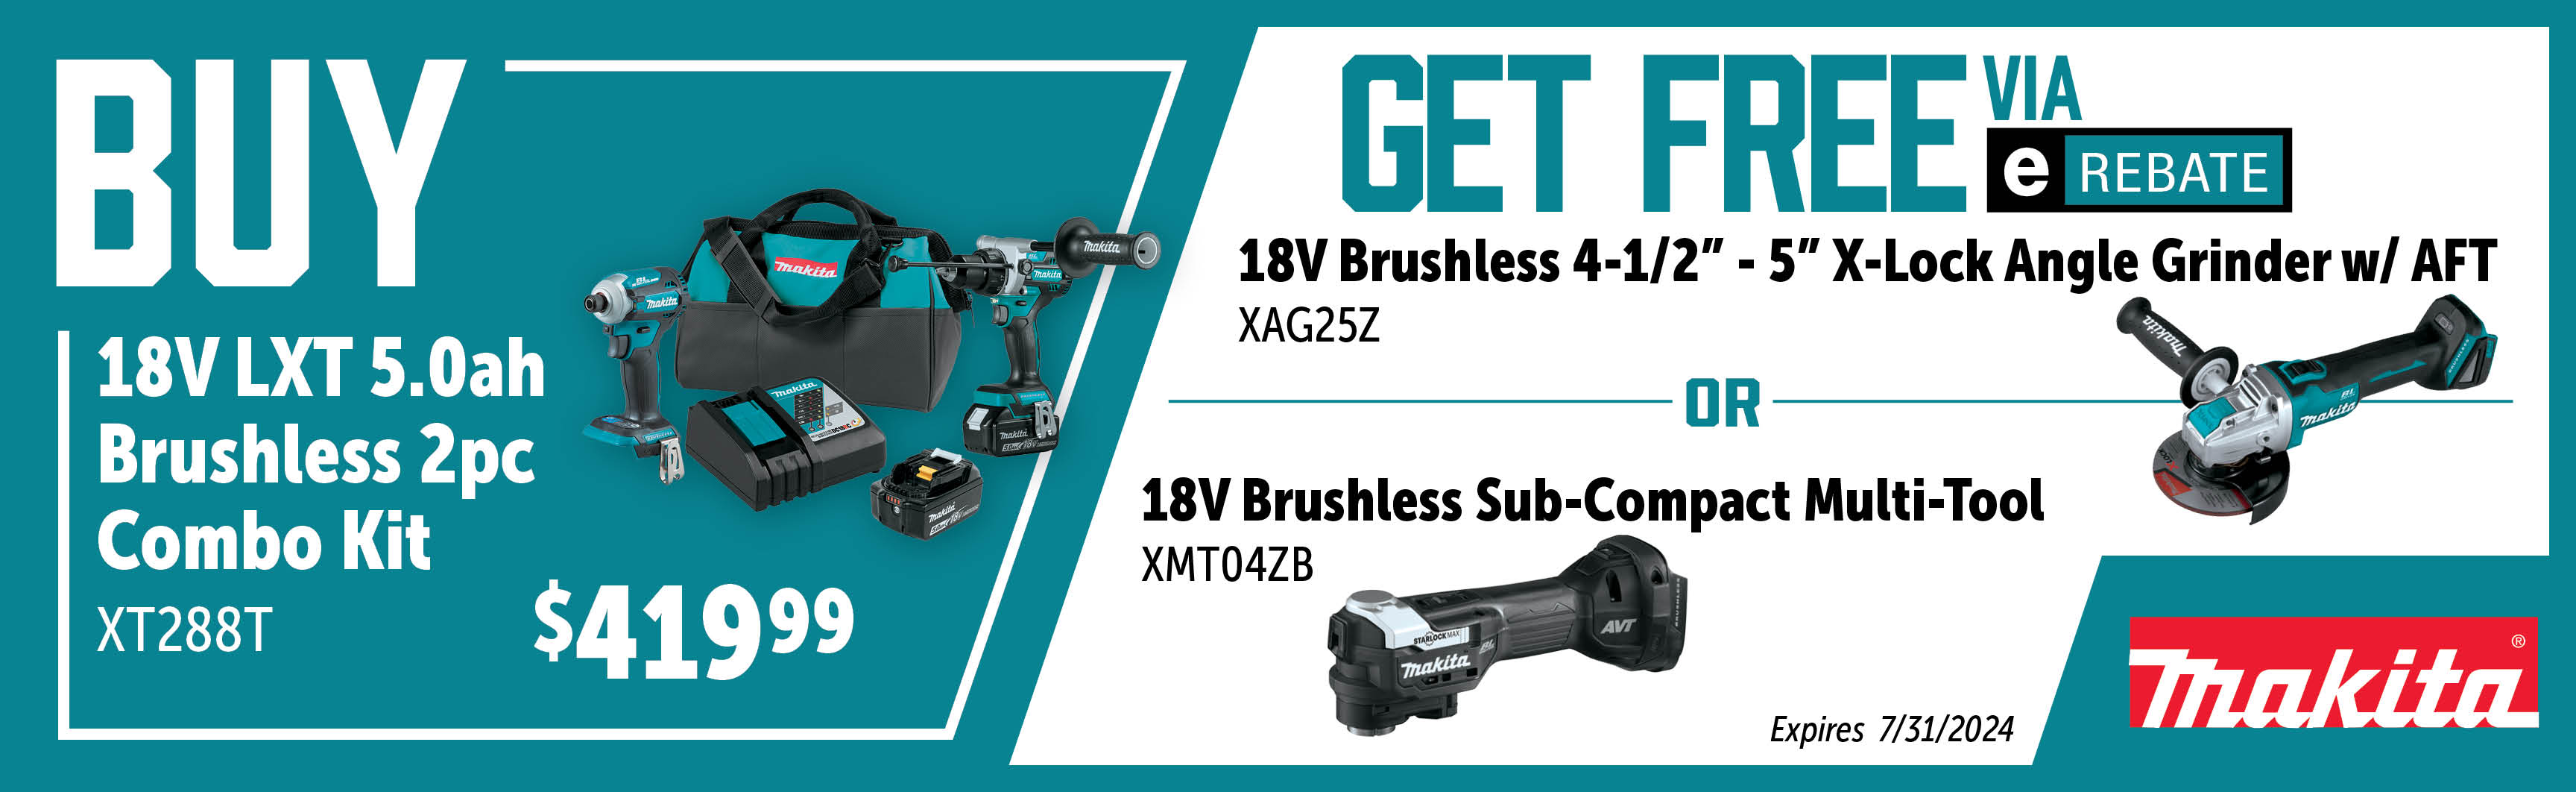 Makita May - July: Buy a XT288T and Get a Free XAG25Z or XMT04ZB Via E-Rebate